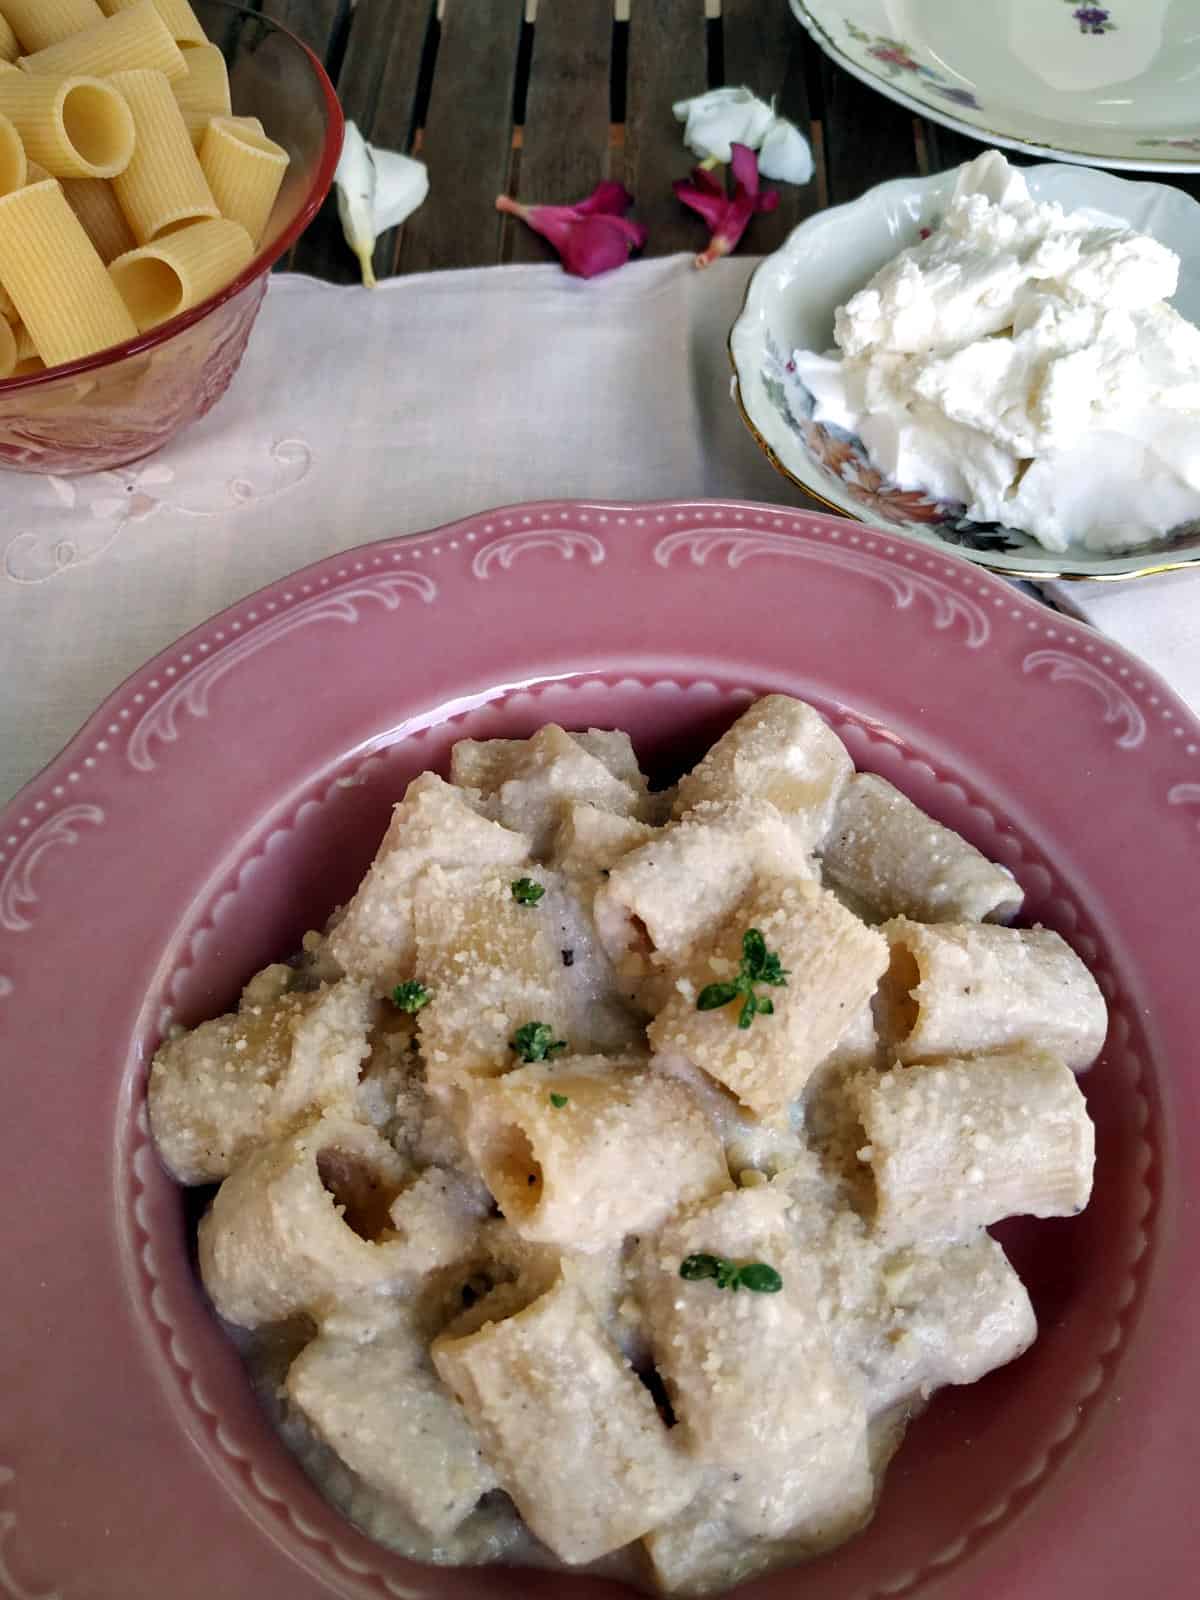 A Onion and Ricotta Pasta on a pink plate and white linen shown from above. A little plate with ricotta on the background